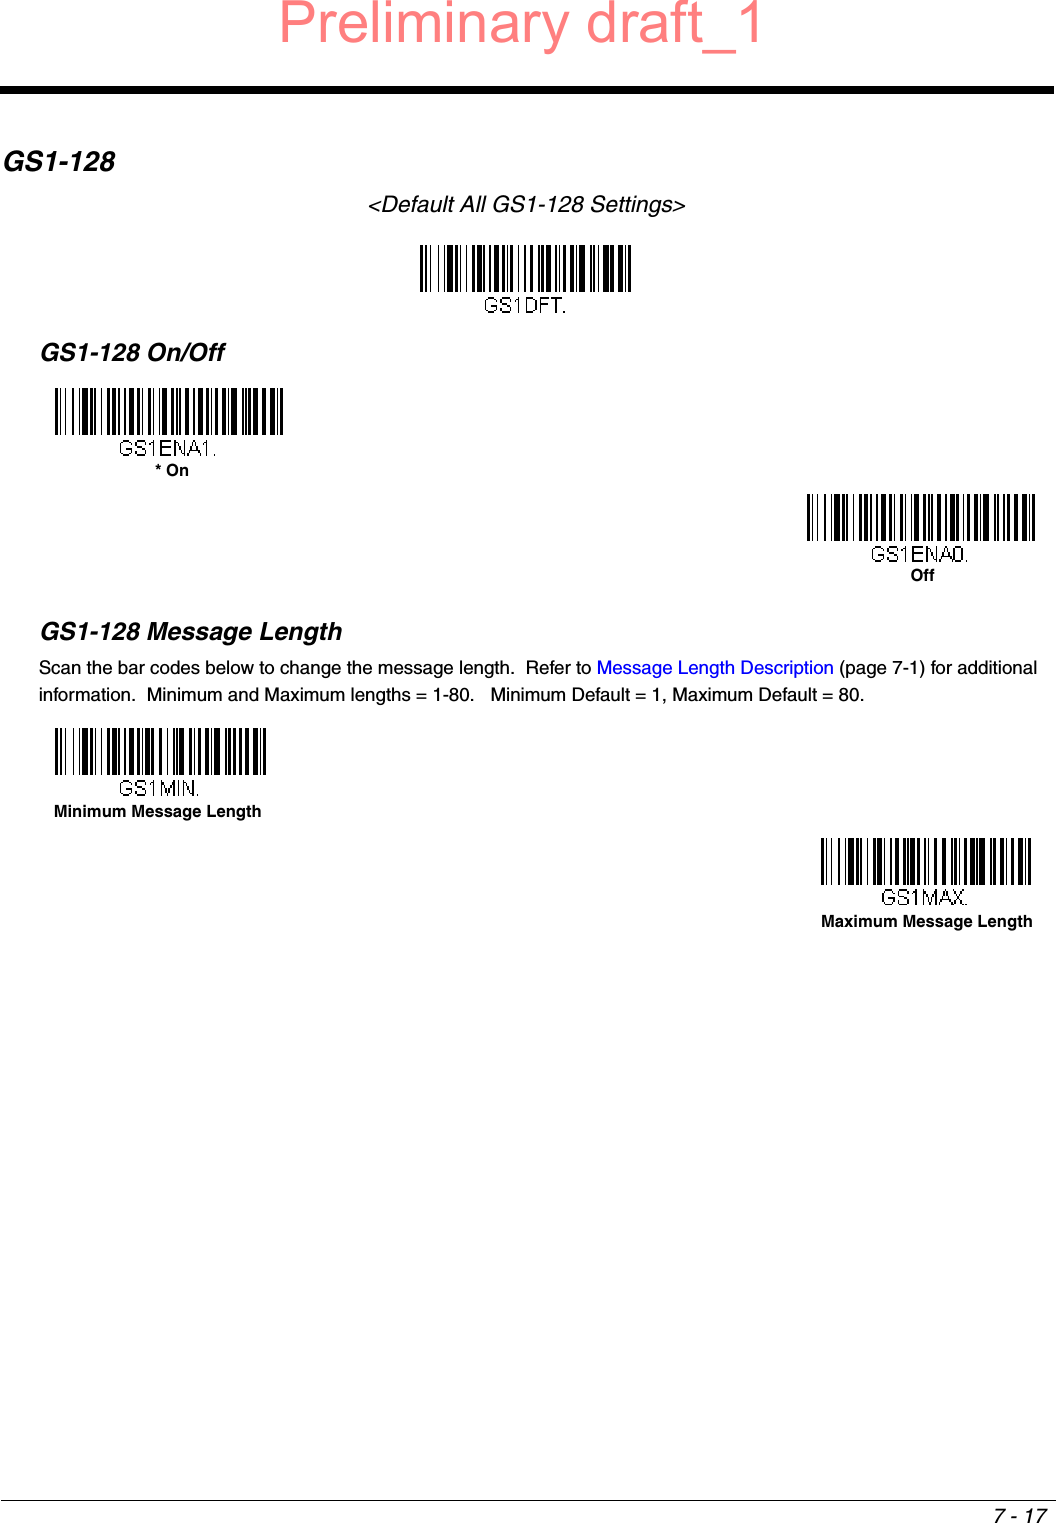 7 - 17GS1-128&lt;Default All GS1-128 Settings&gt;GS1-128 On/OffGS1-128 Message LengthScan the bar codes below to change the message length.  Refer to Message Length Description (page 7-1) for additional information.  Minimum and Maximum lengths = 1-80.   Minimum Default = 1, Maximum Default = 80.* OnOffMinimum Message LengthMaximum Message LengthPreliminary draft_1